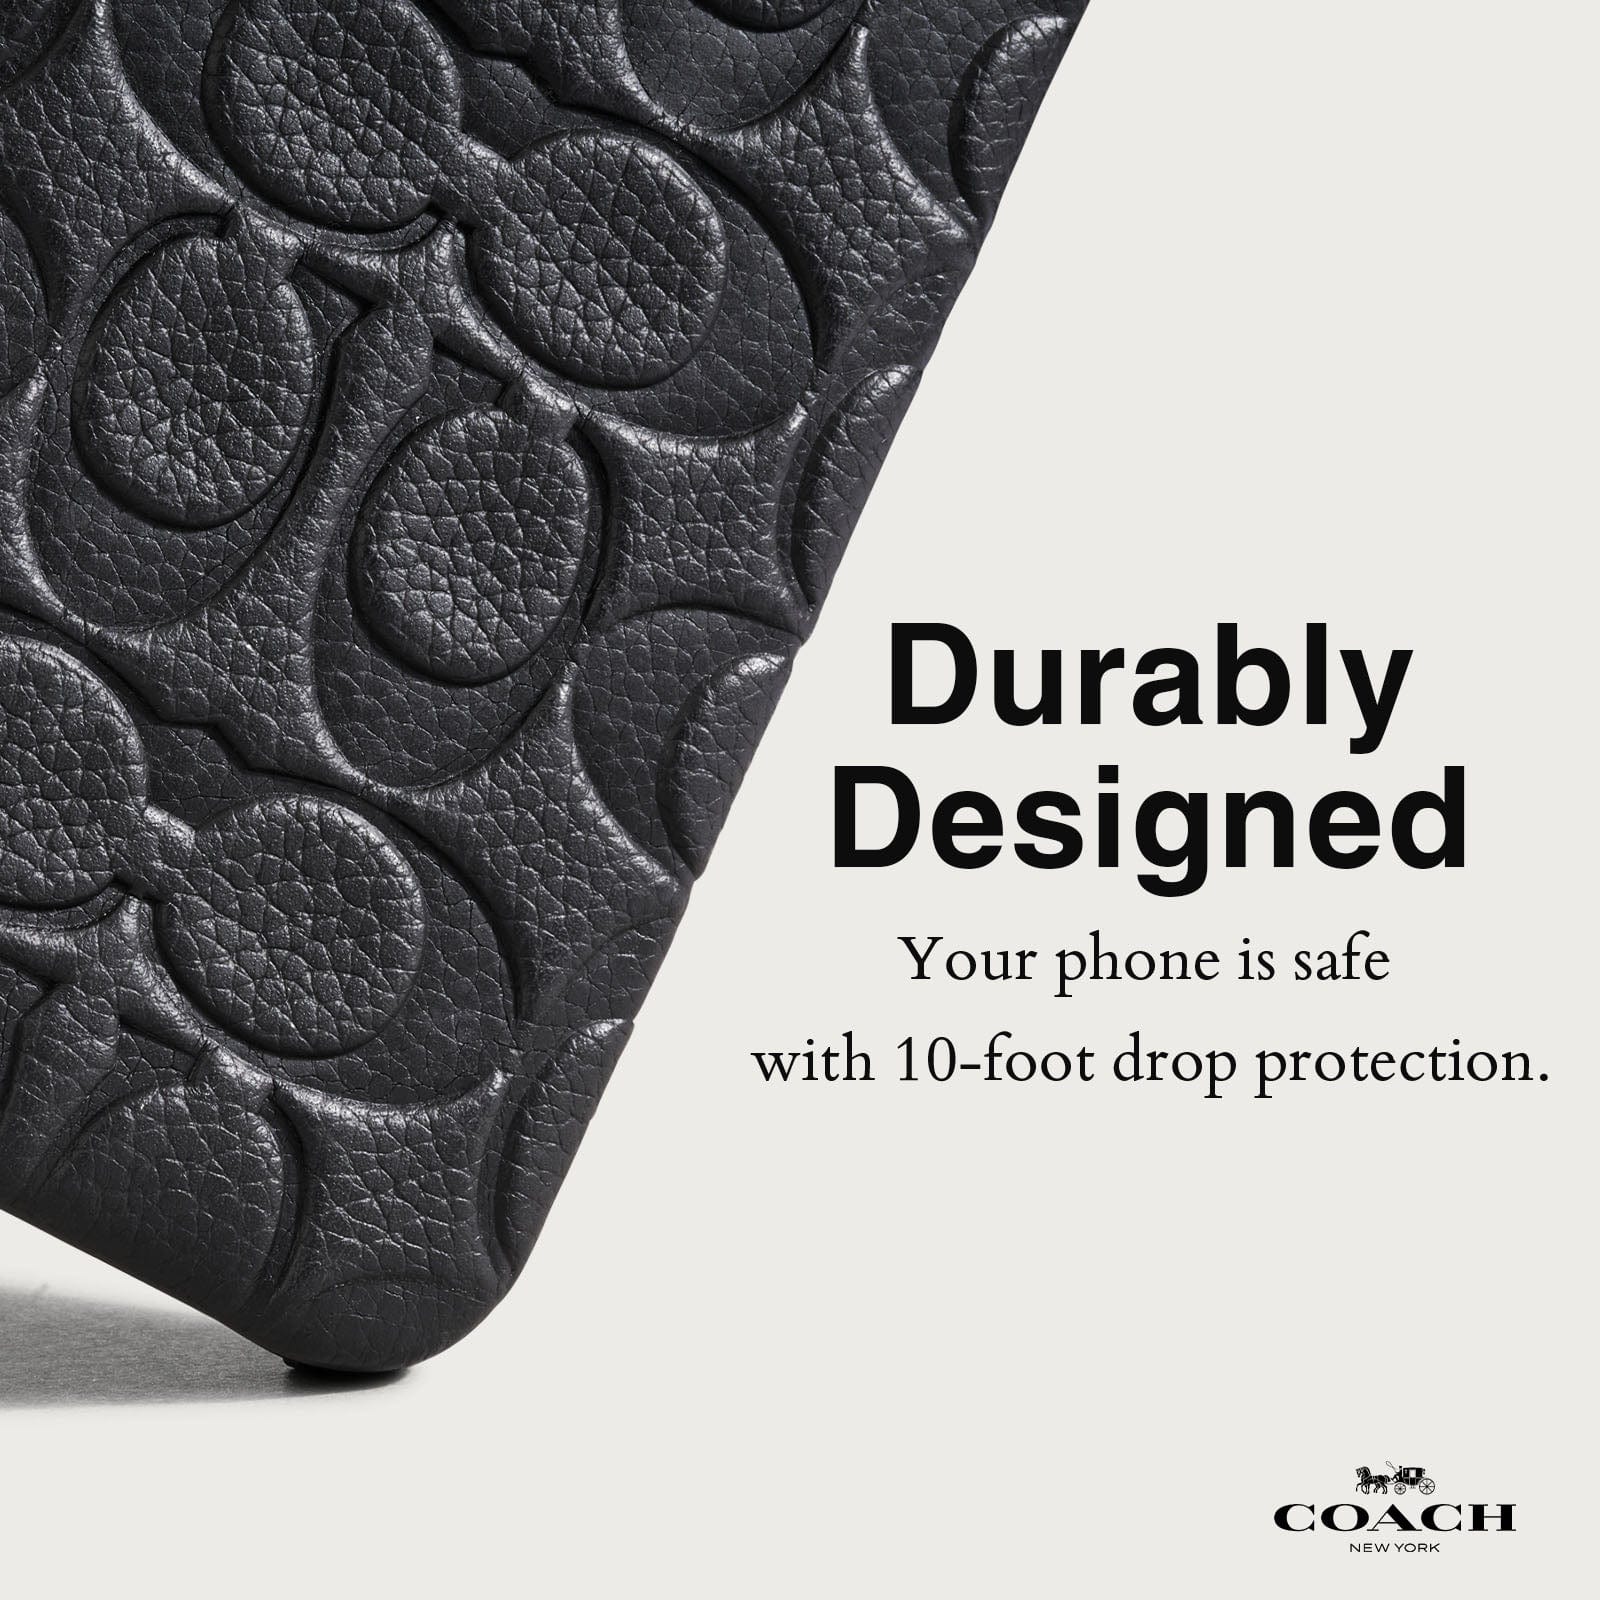 DURABLY DESIGNED. YOUR PHONE IS SAFE WITH 10 FOOT DROP PROTECTION